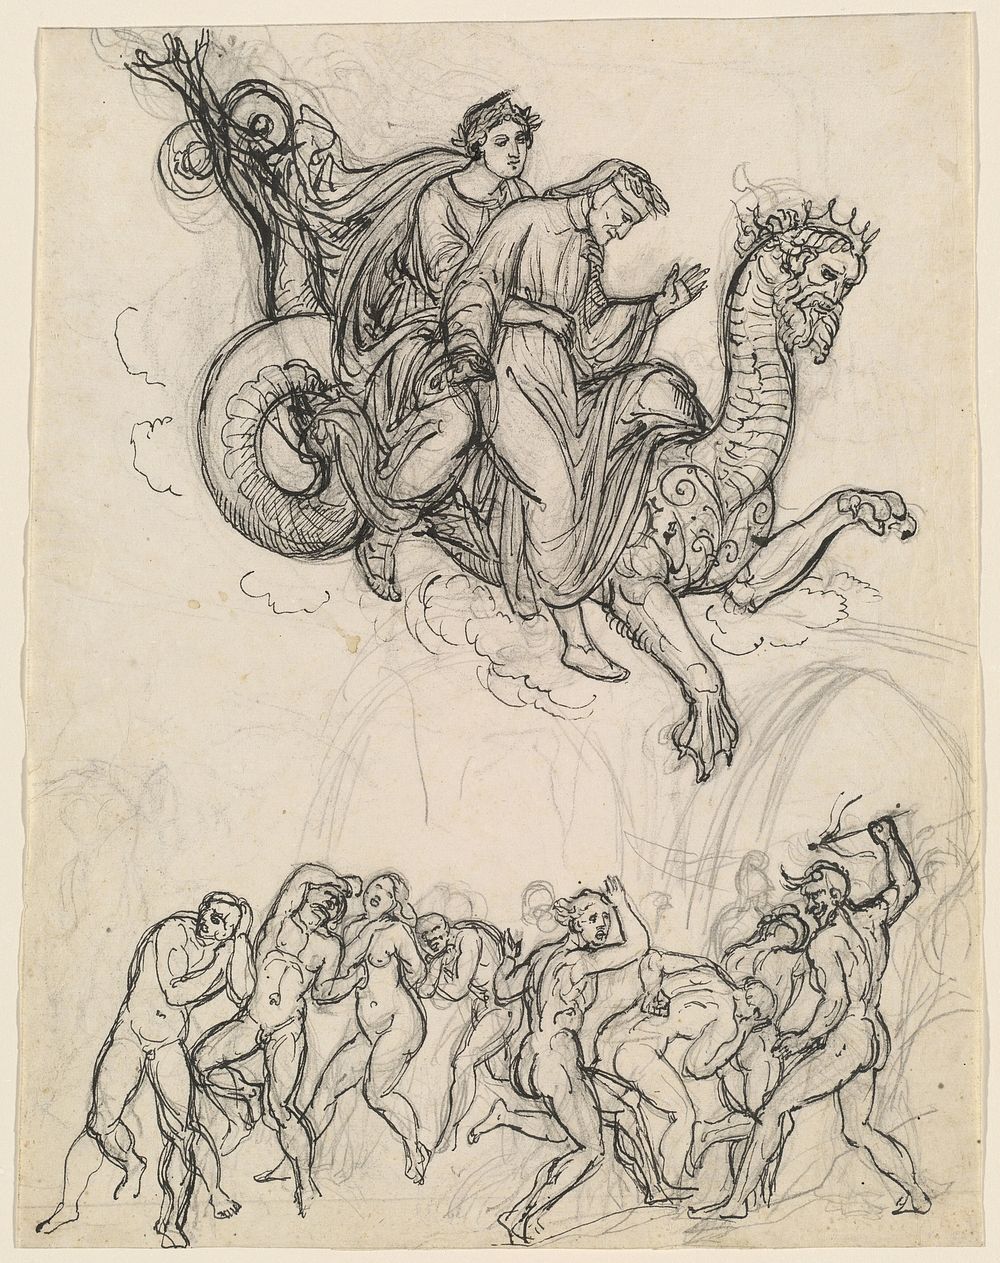 Dante and Virgil Riding on the Back of Geryon (c. 1821) by Joseph Anton Koch.  